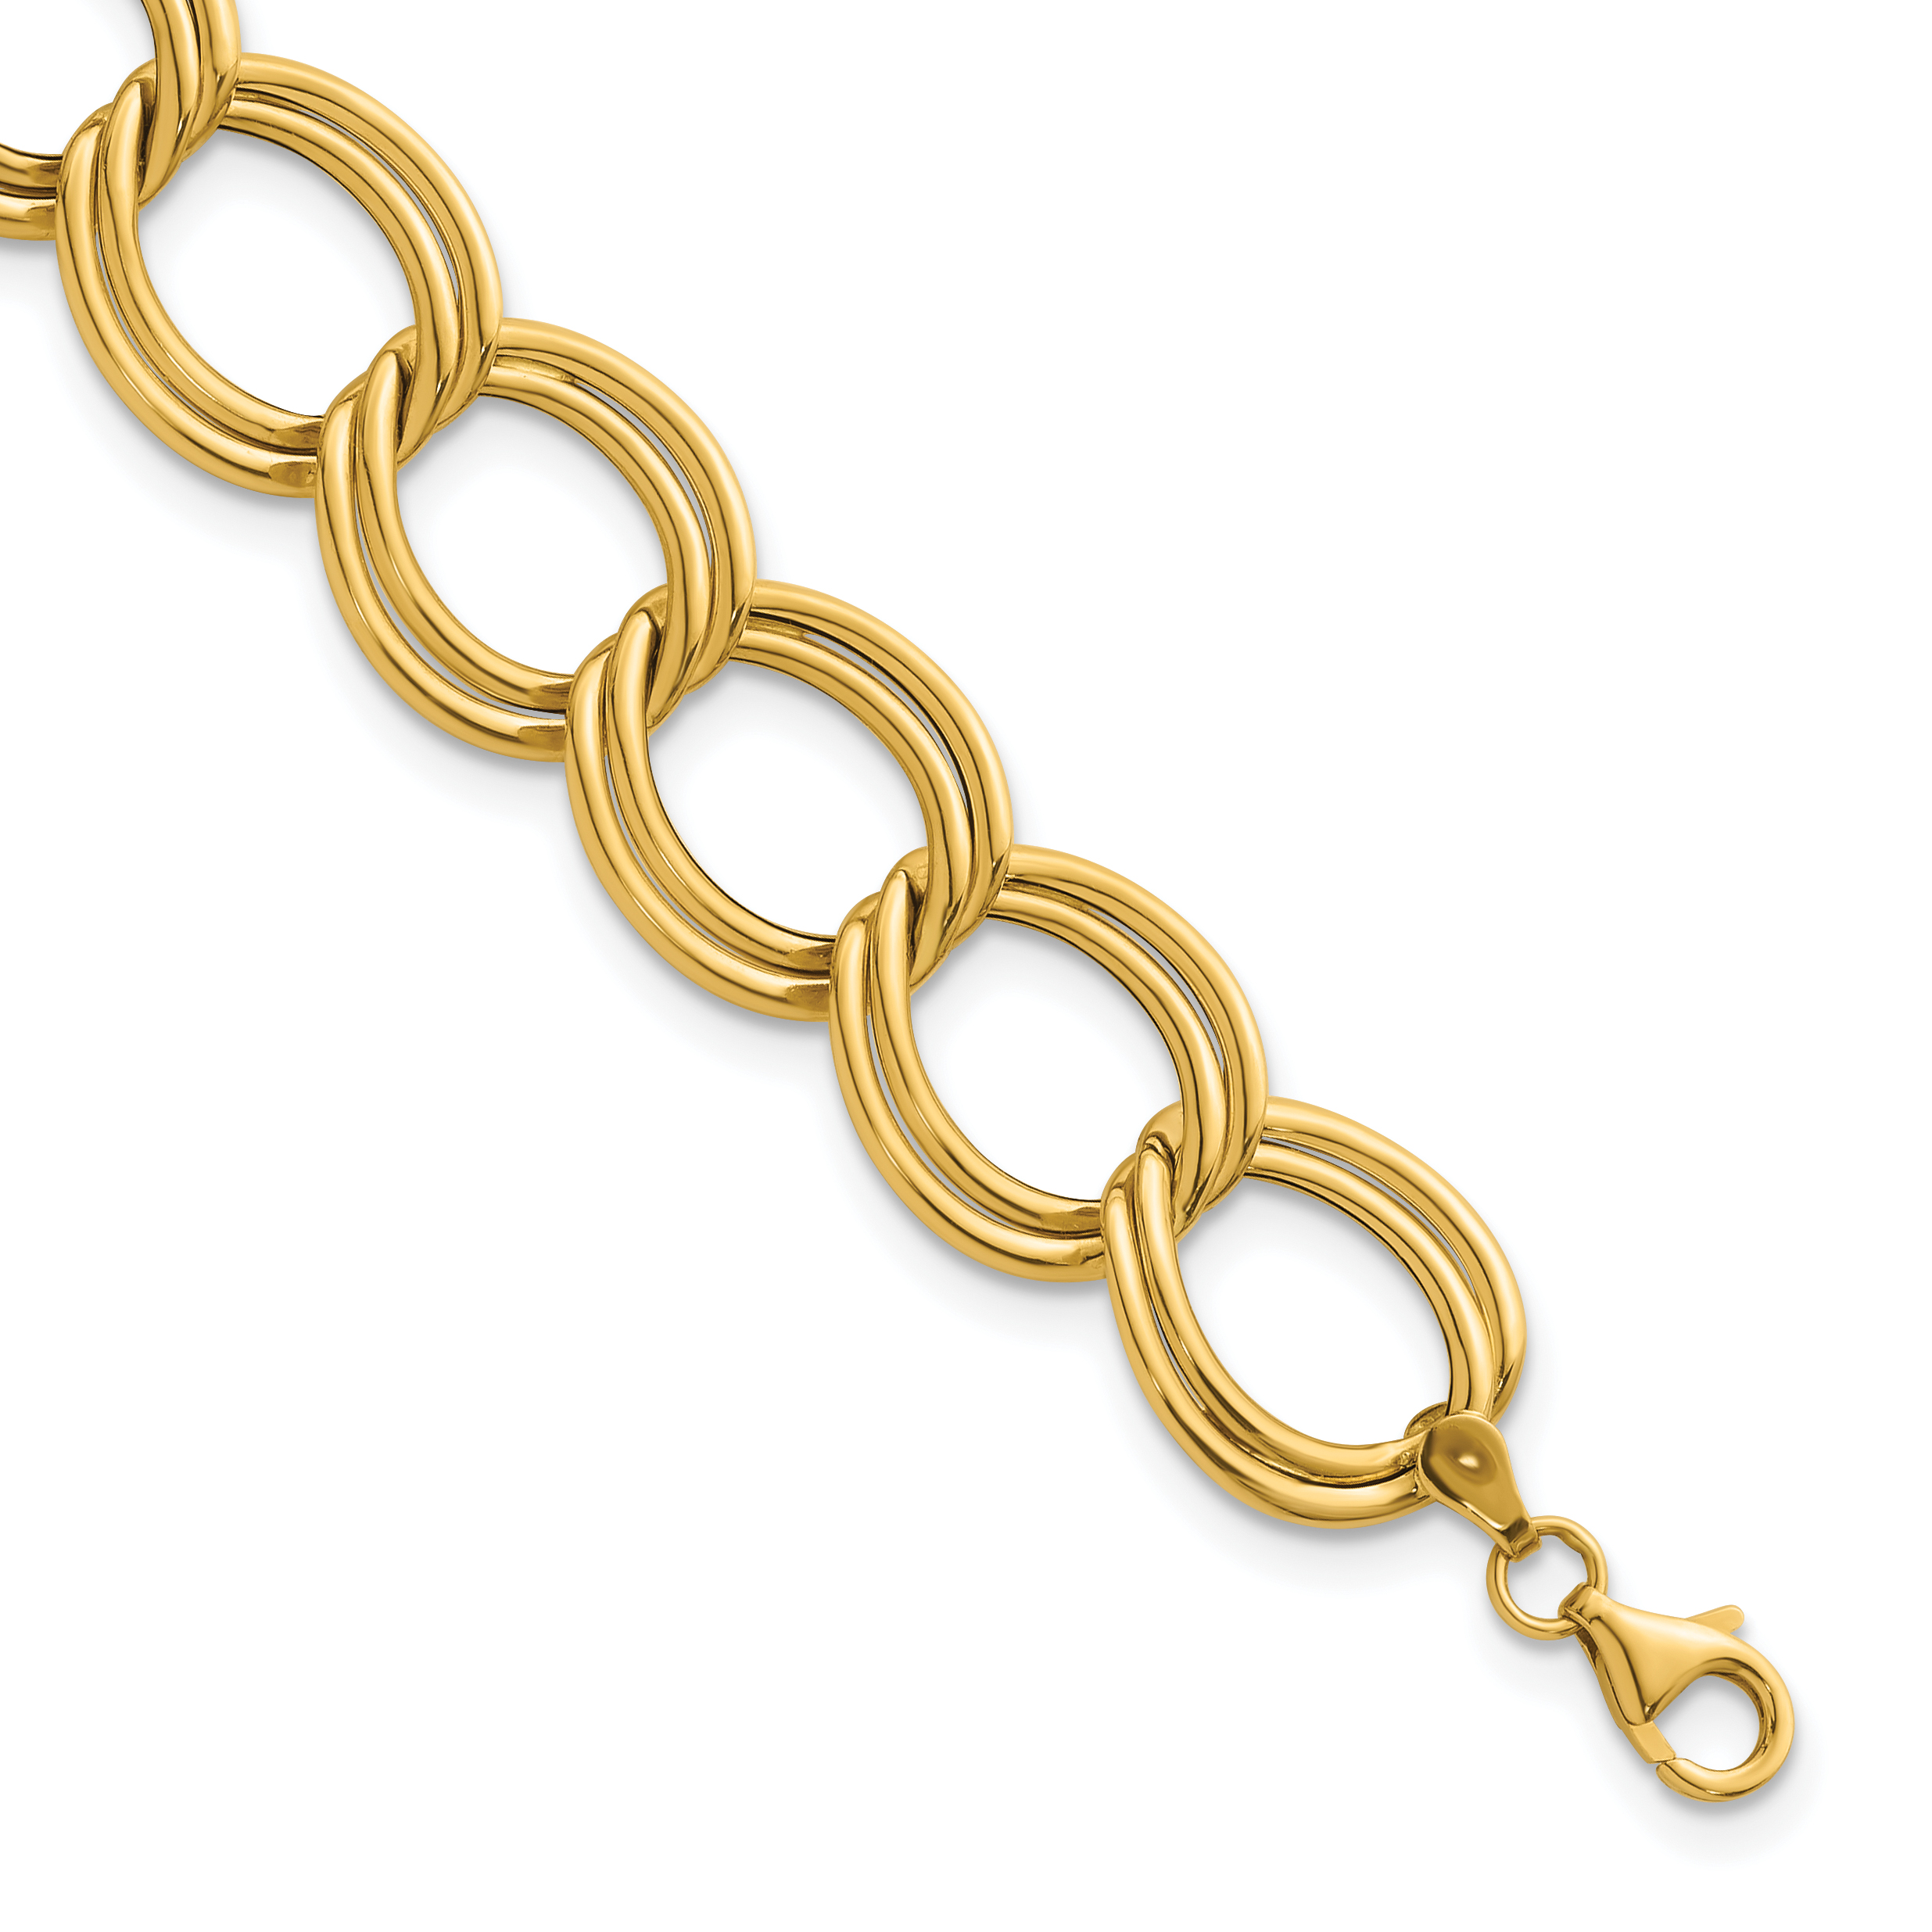 Herco 14K Polished 16mm Double Link 7.5 inch Bracelet - Quality Gold